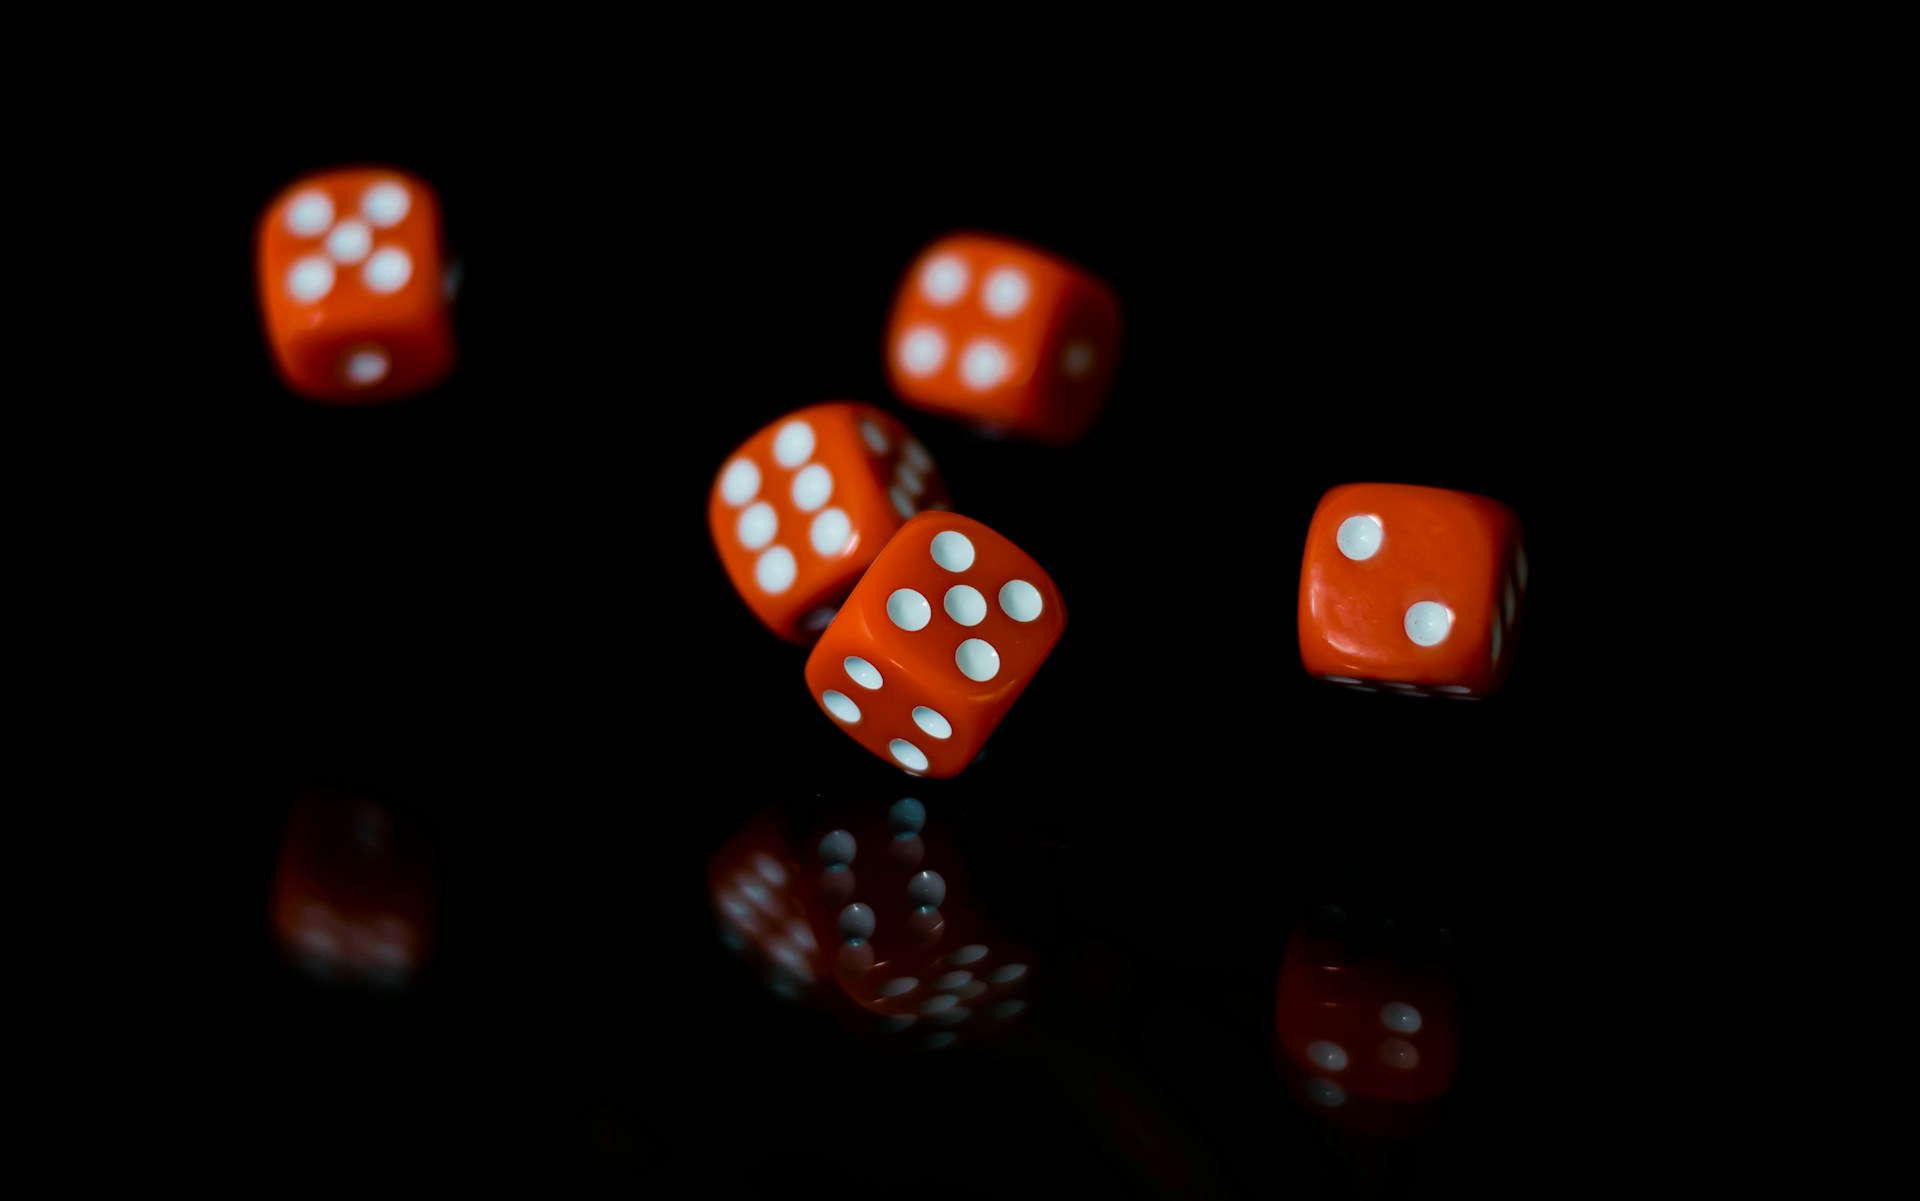 robert stump pQyTChJwEDI unsplash Roll the Crypto Dice Right: 6 Quick Secrets to Betting Victory